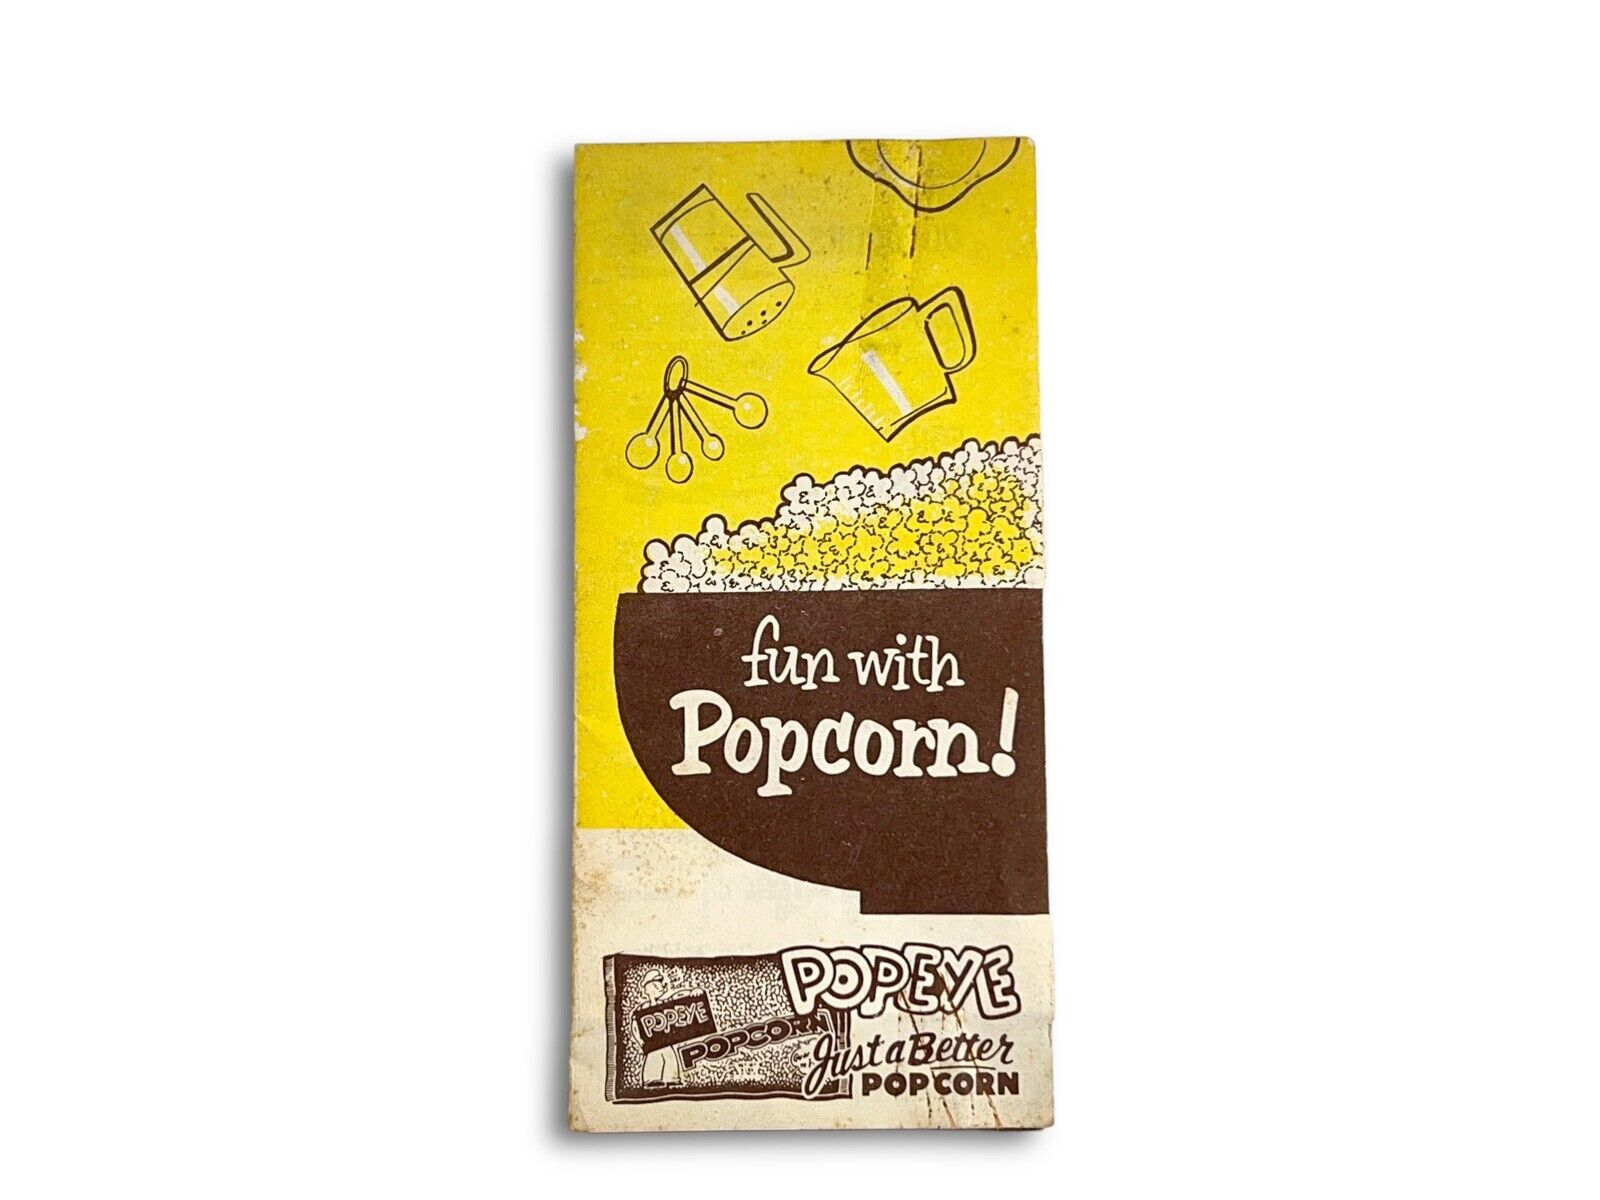 Popeye Fun With Popcorn vintage 1950s recipes advertising paper brochure